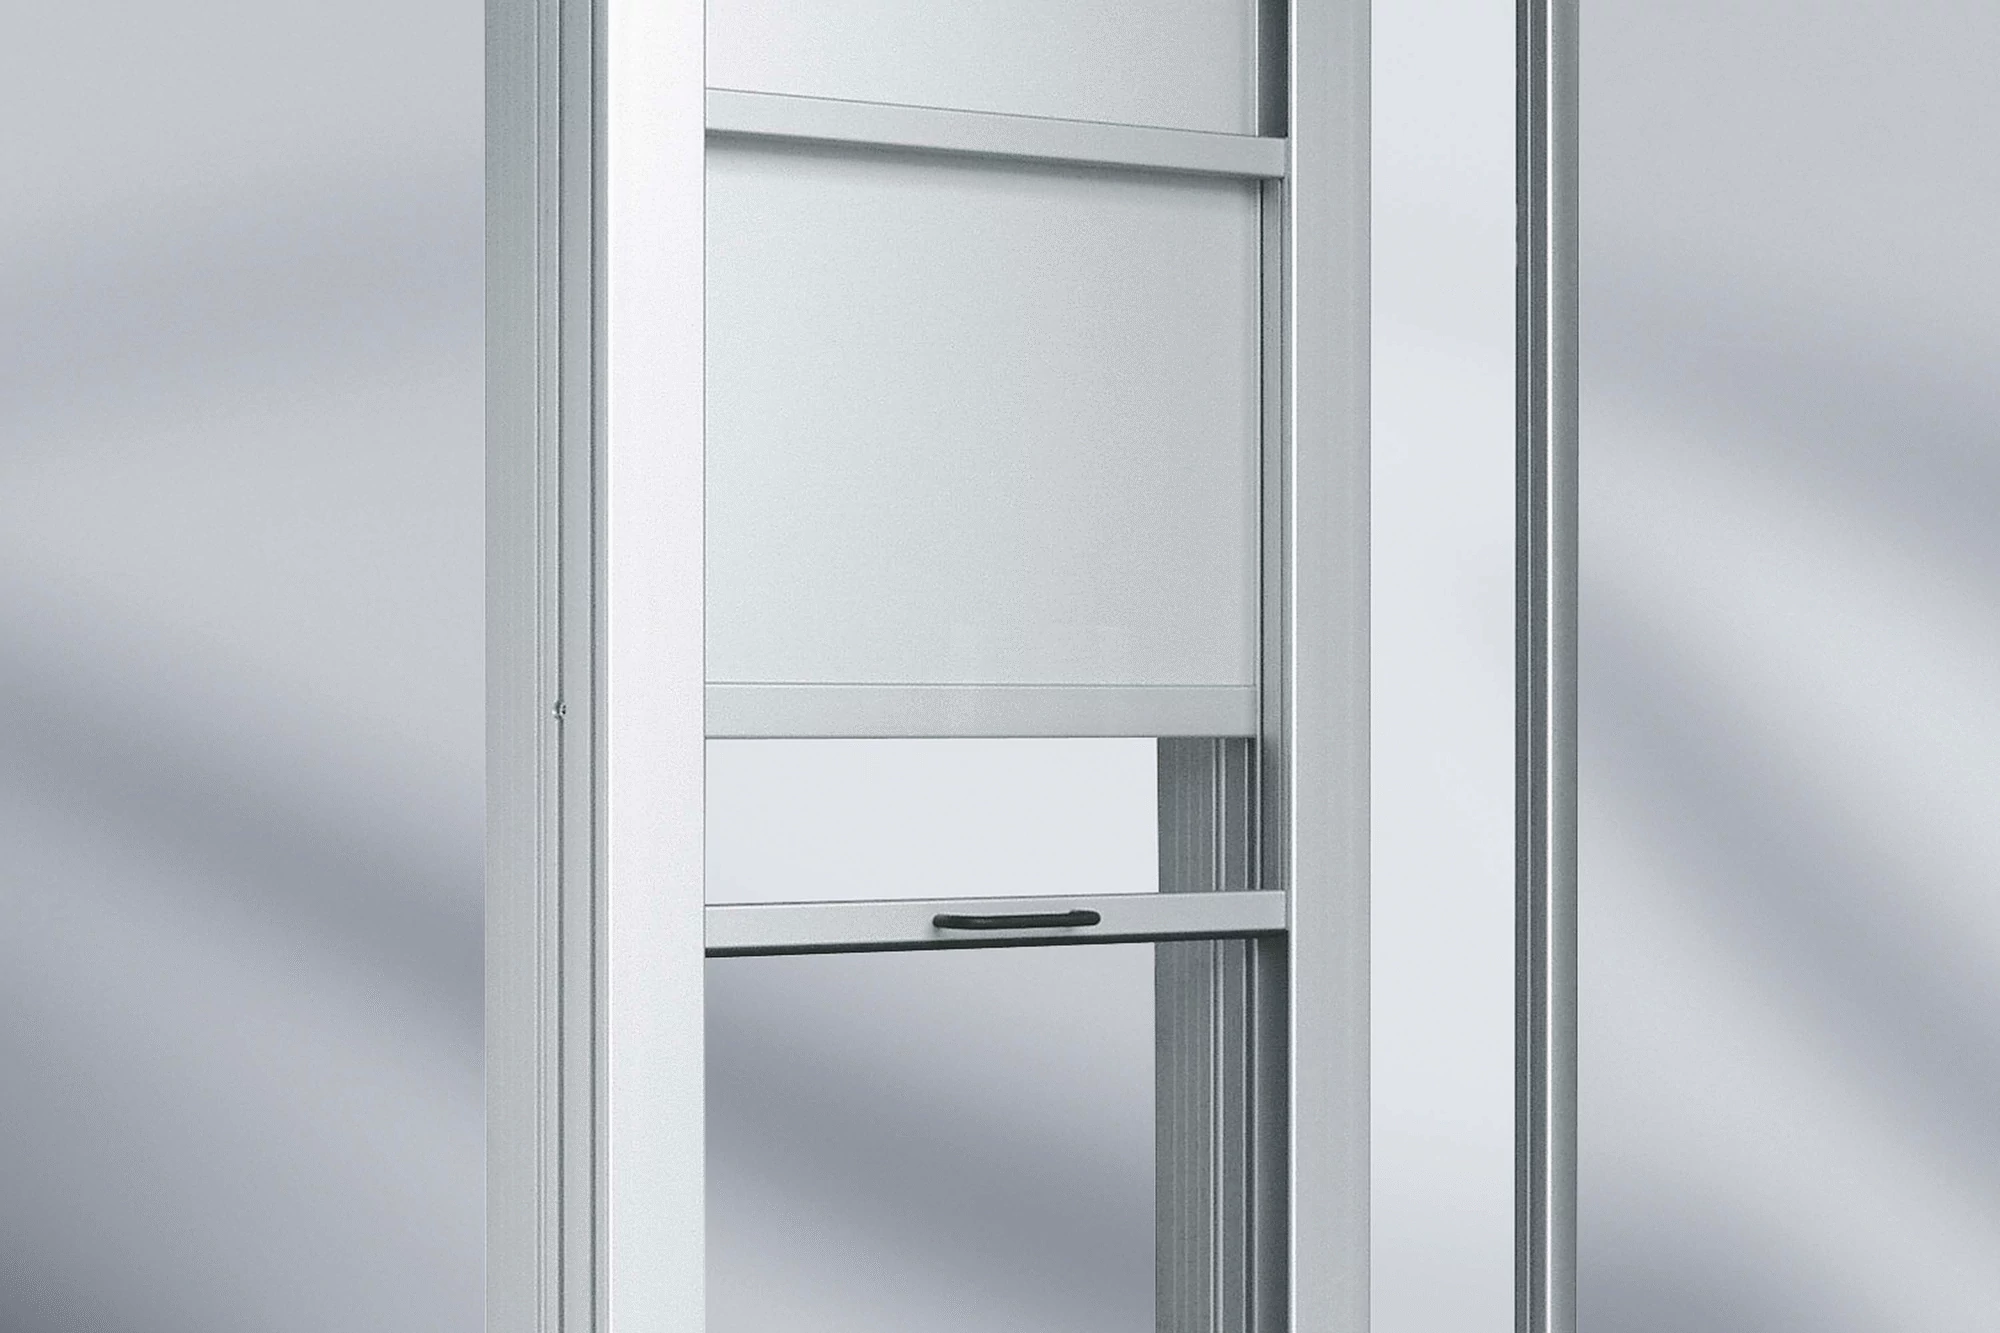 Lifting-door systems